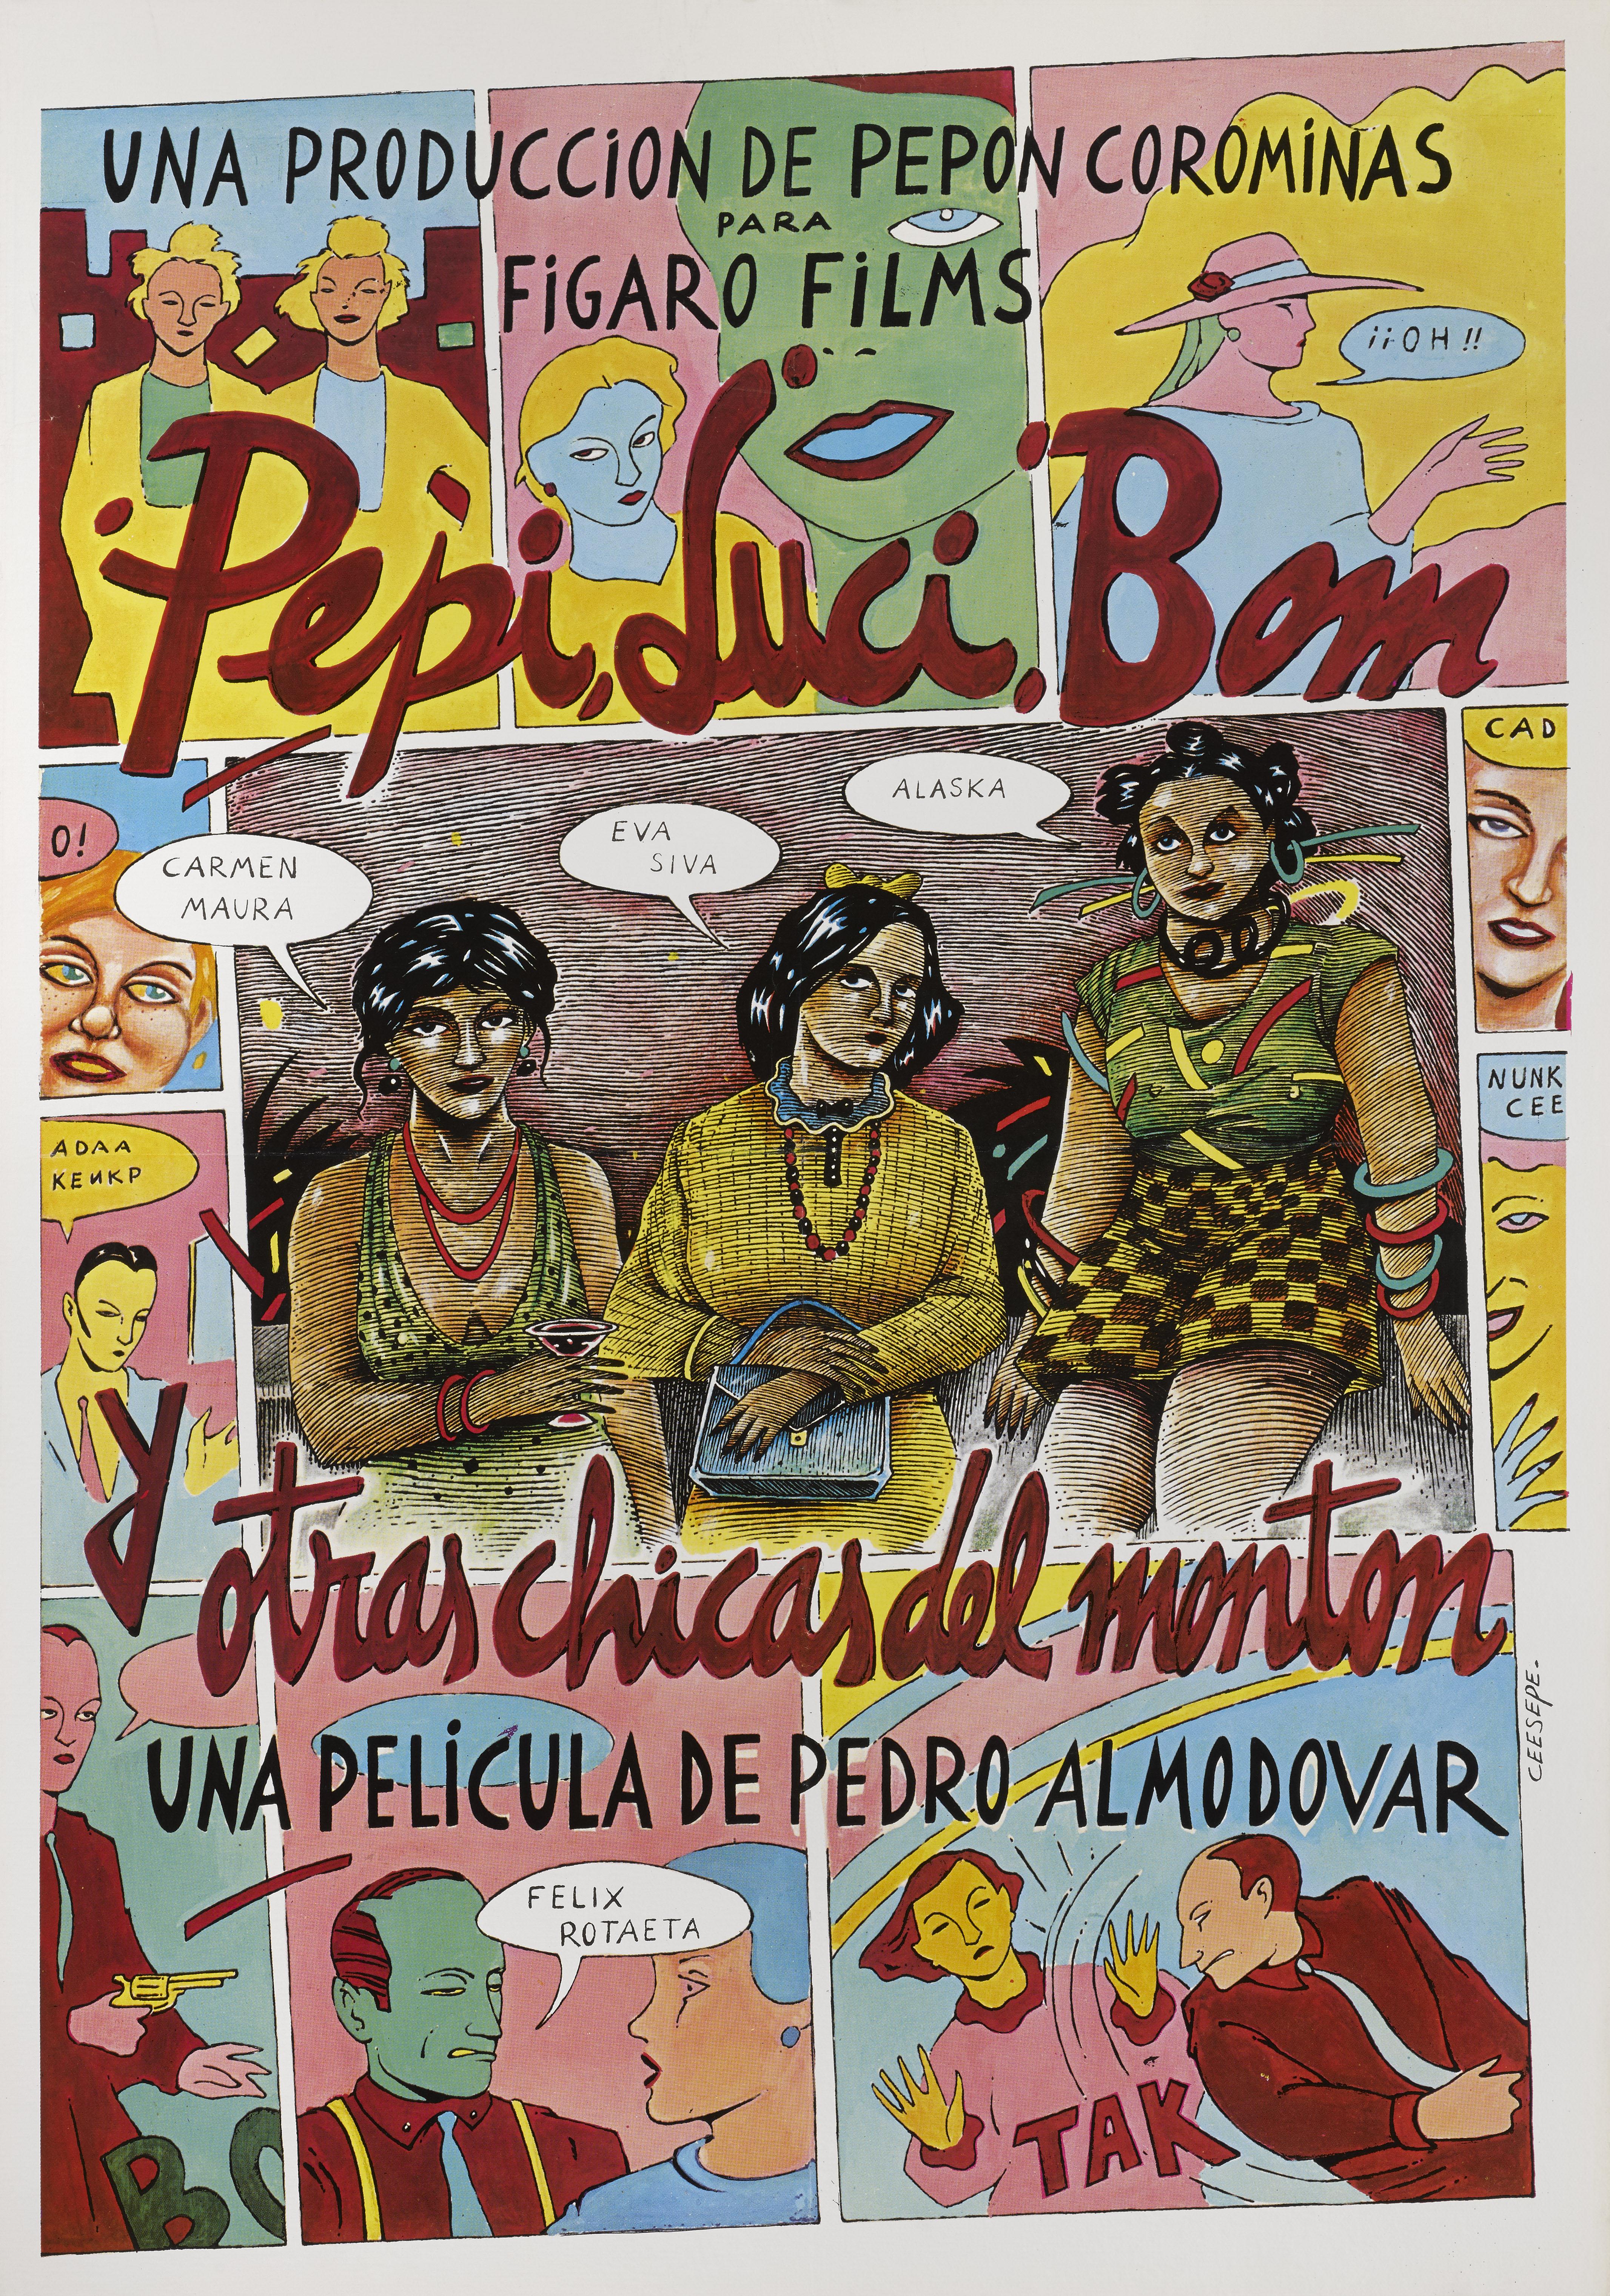 Original Spanish film poster from the 1978 film Pepi, Luci, Bom This film was written and directed by Pedro Almodóvar, and starred Carmen Maura, Felix Rotaeta This poster is in excellent condition with the colors remaining very bright. The art work